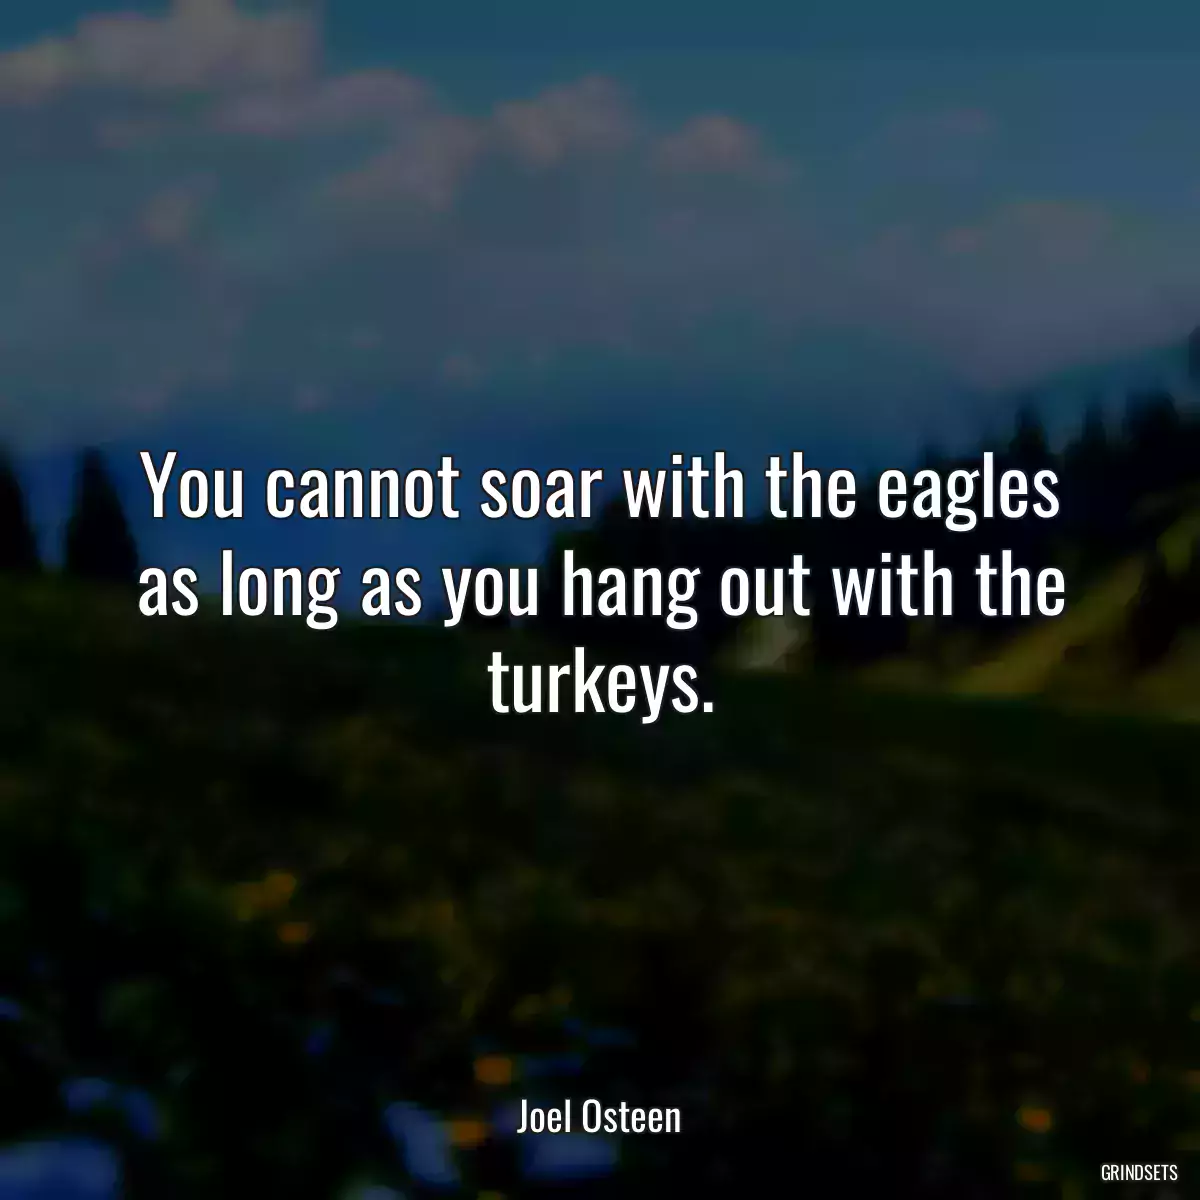 You cannot soar with the eagles as long as you hang out with the turkeys.